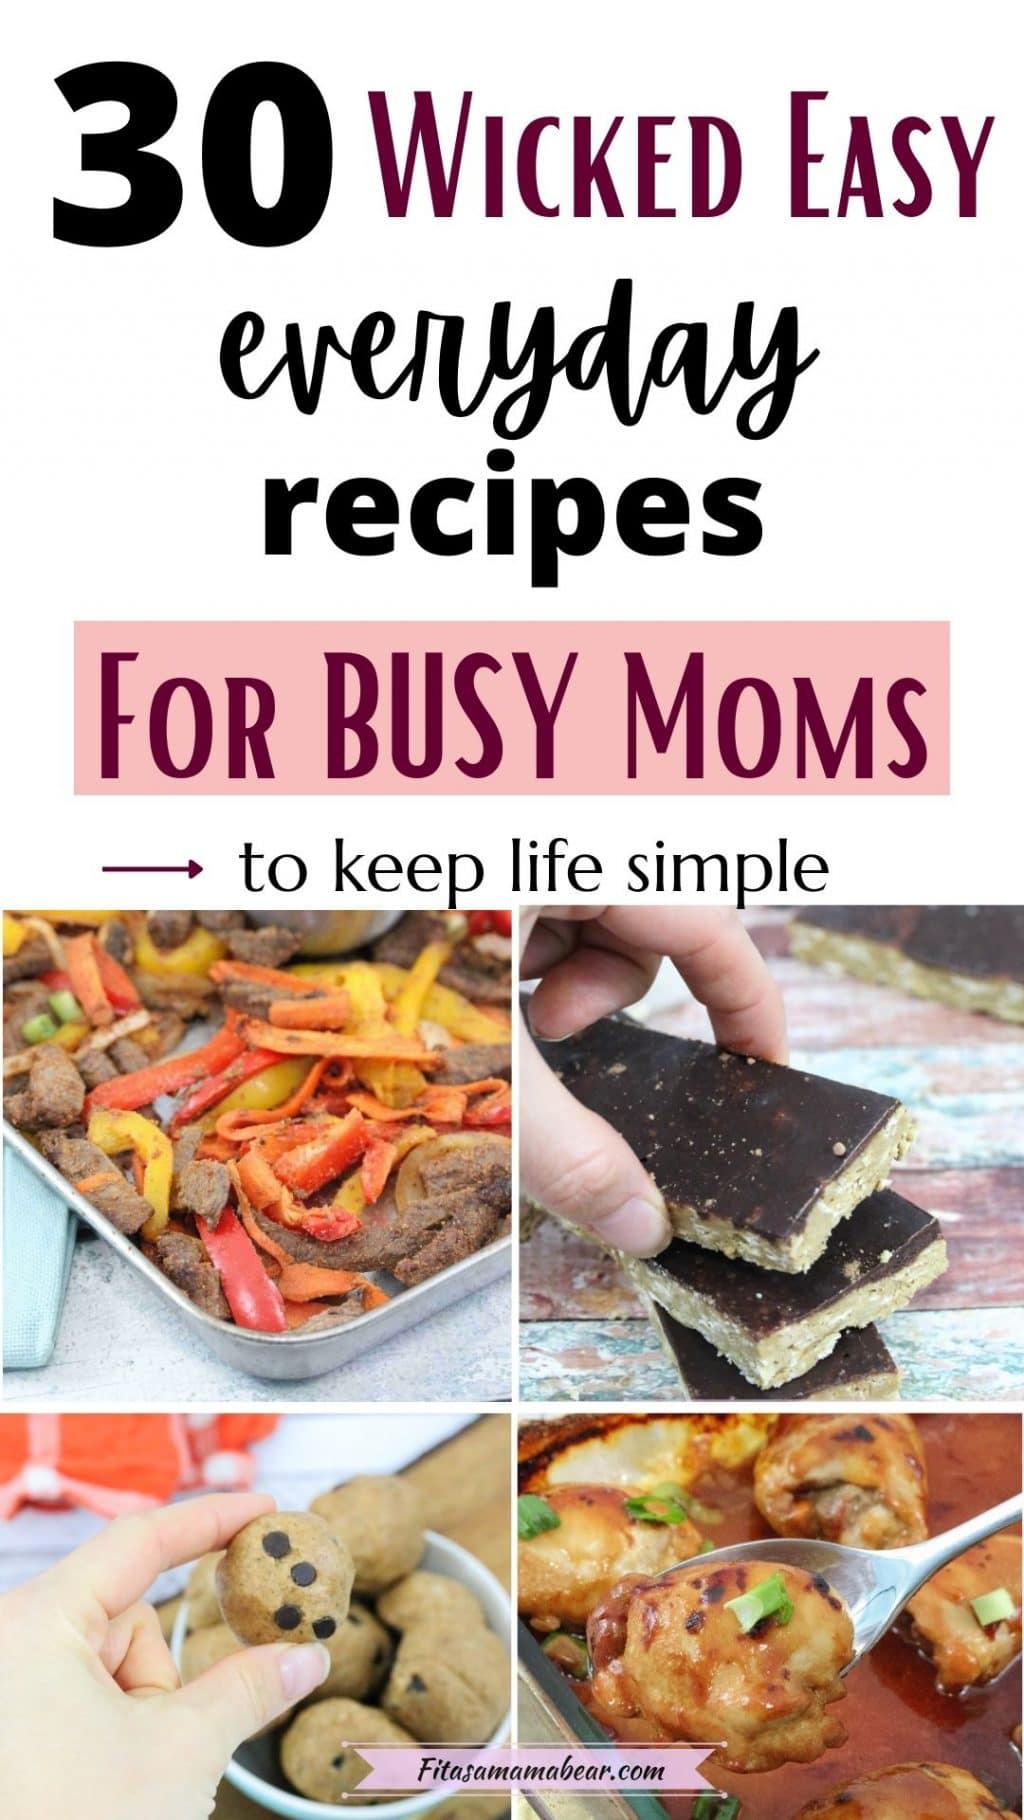 Pin image with text: four images of steak fajitas on a baking tray, chocolate protein bars, a quinoa and veggie wrap and teriyaki chicken with text about dairy free recipes for moms